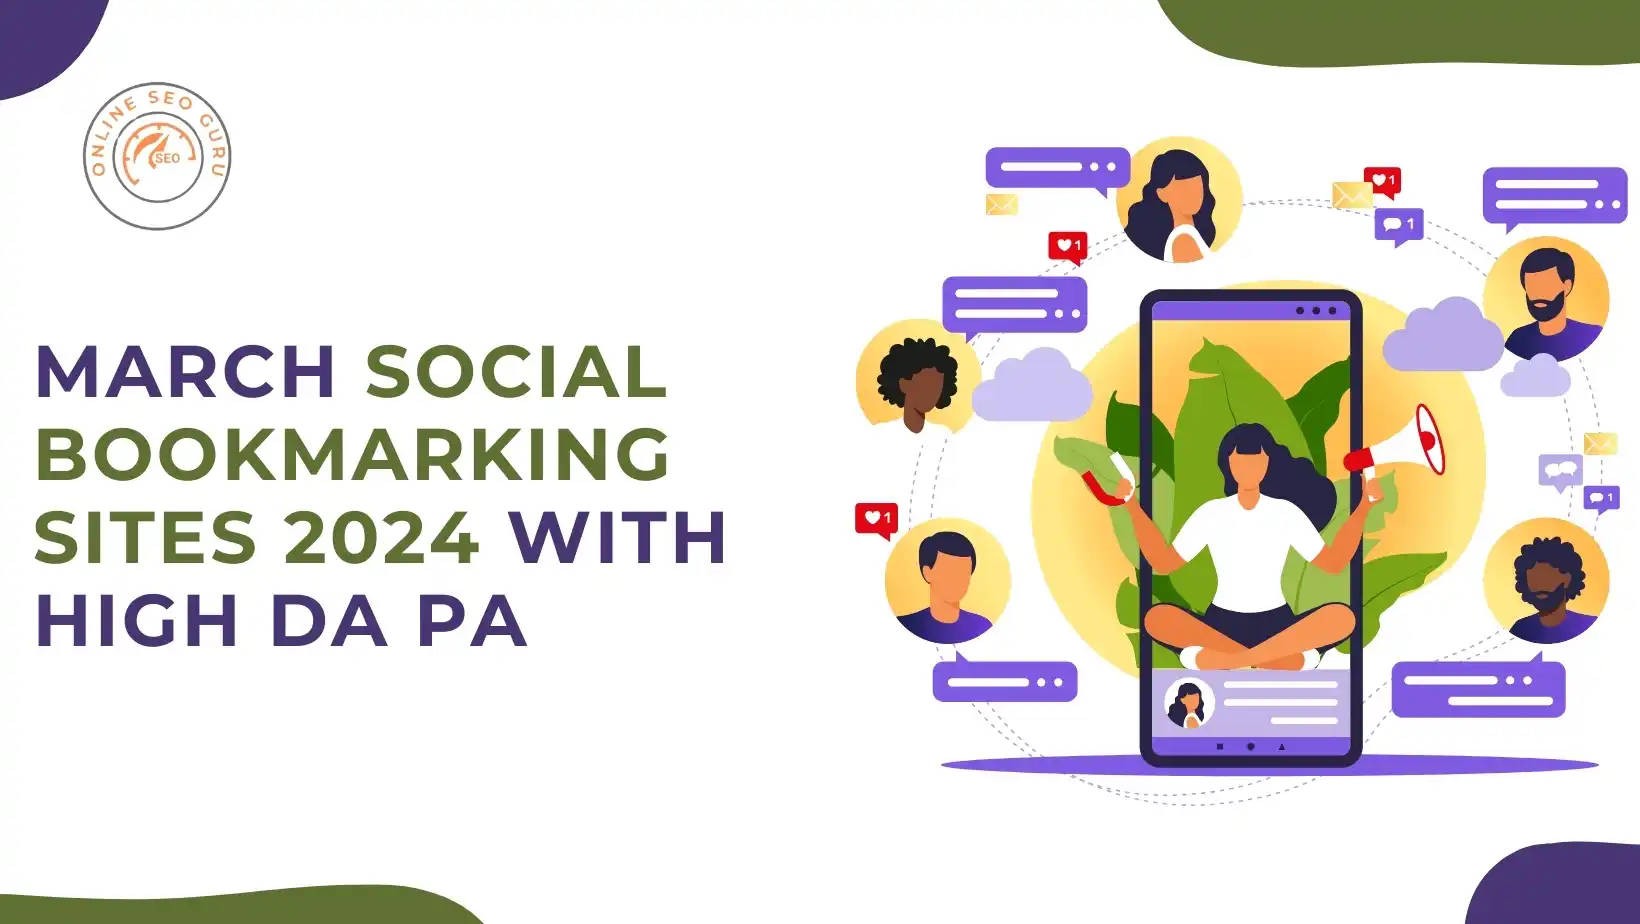 March Social Bookmarking Sites 2024 with High DA PA